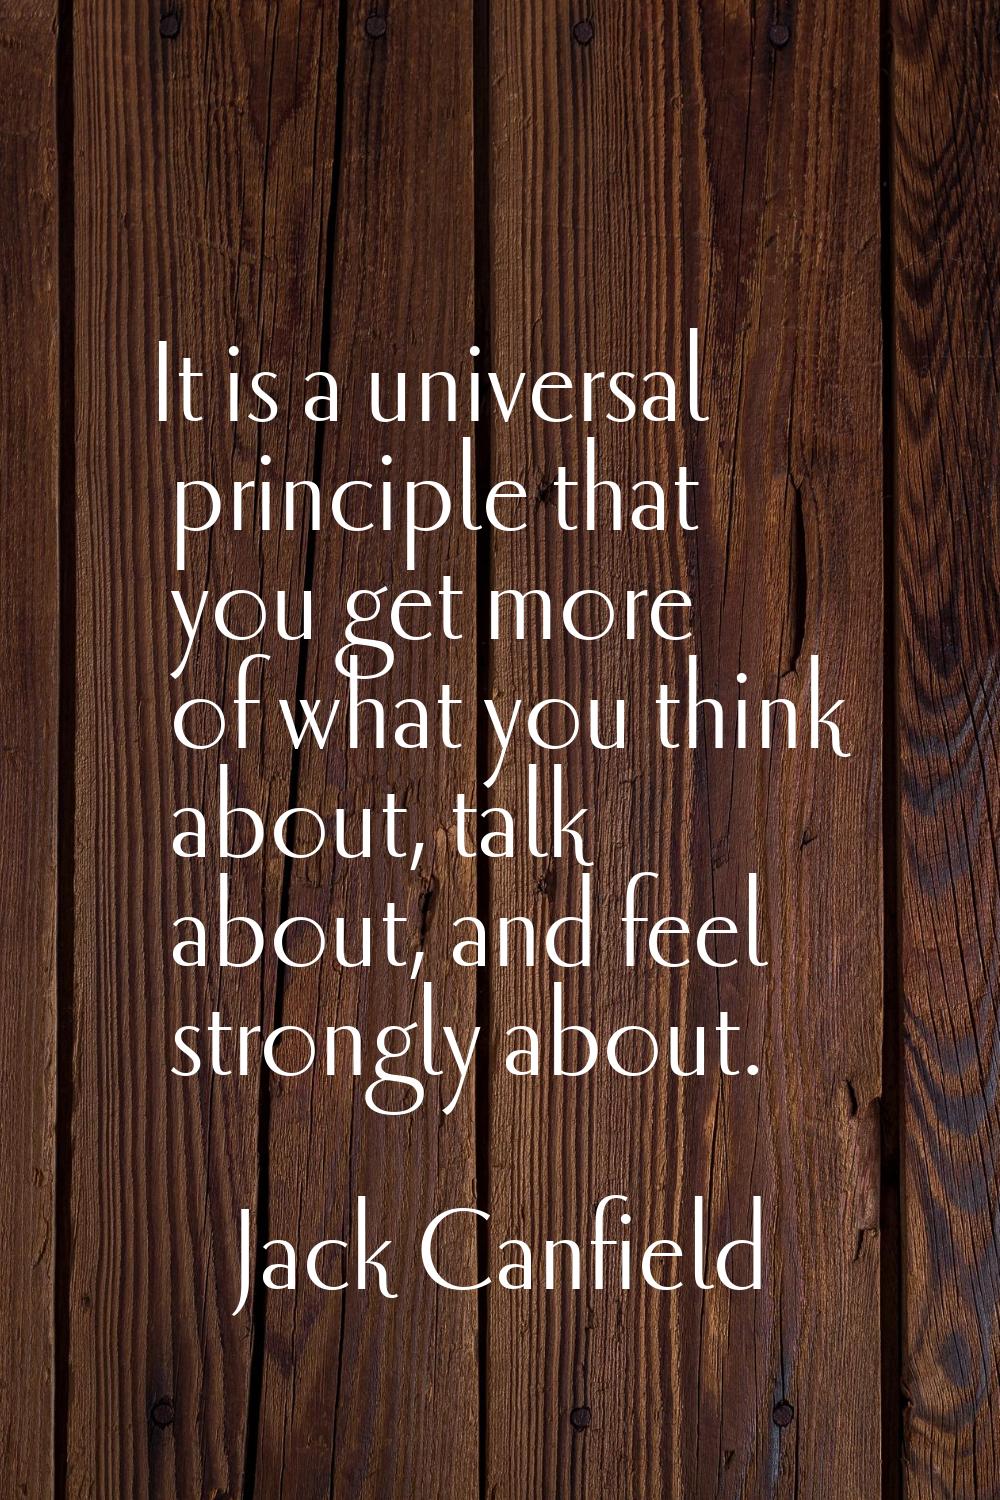 It is a universal principle that you get more of what you think about, talk about, and feel strongl